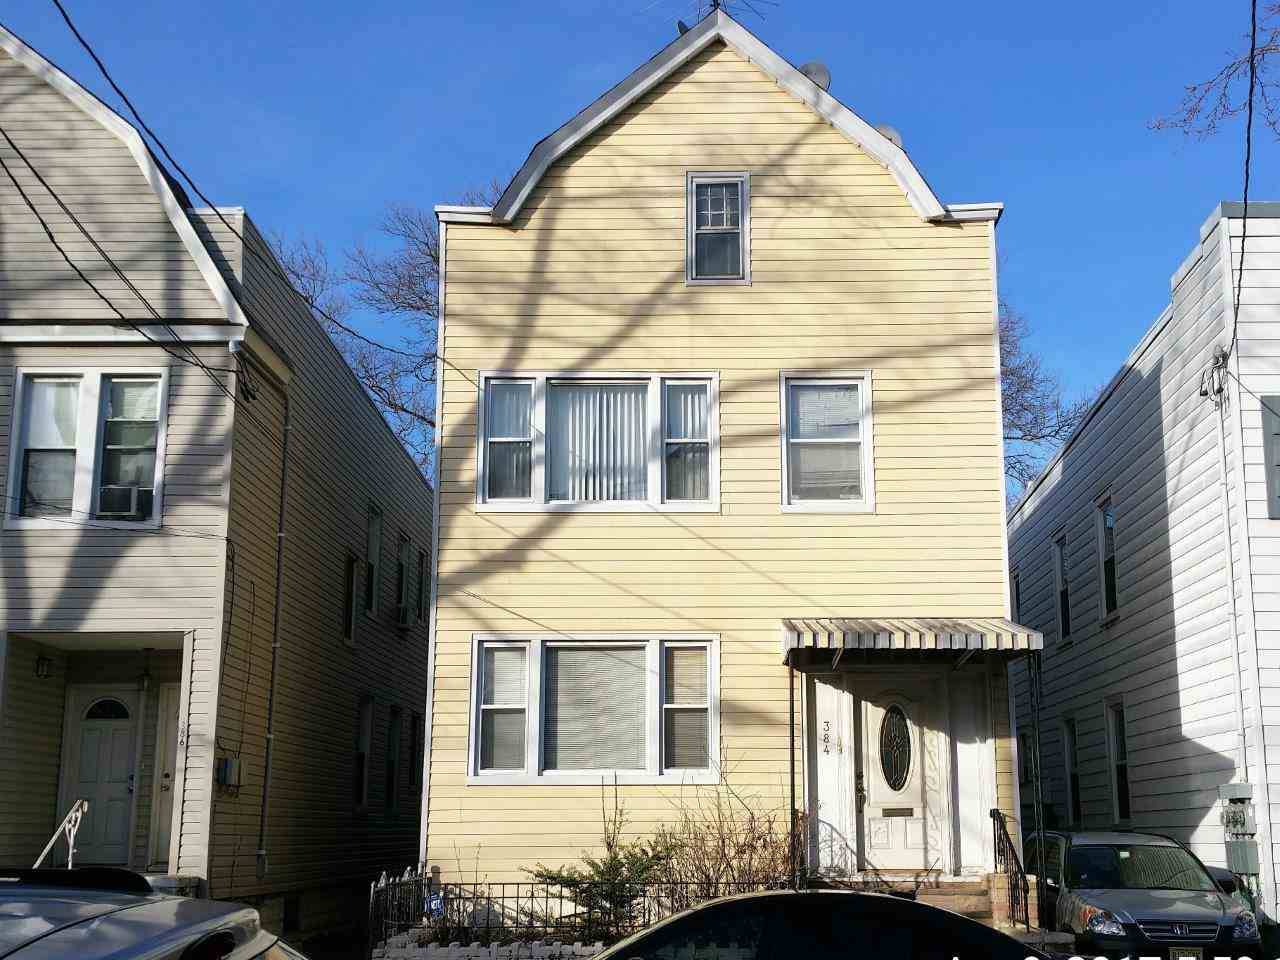 2 Family house in desirable area in Jersey City - Multi-Family New Jersey